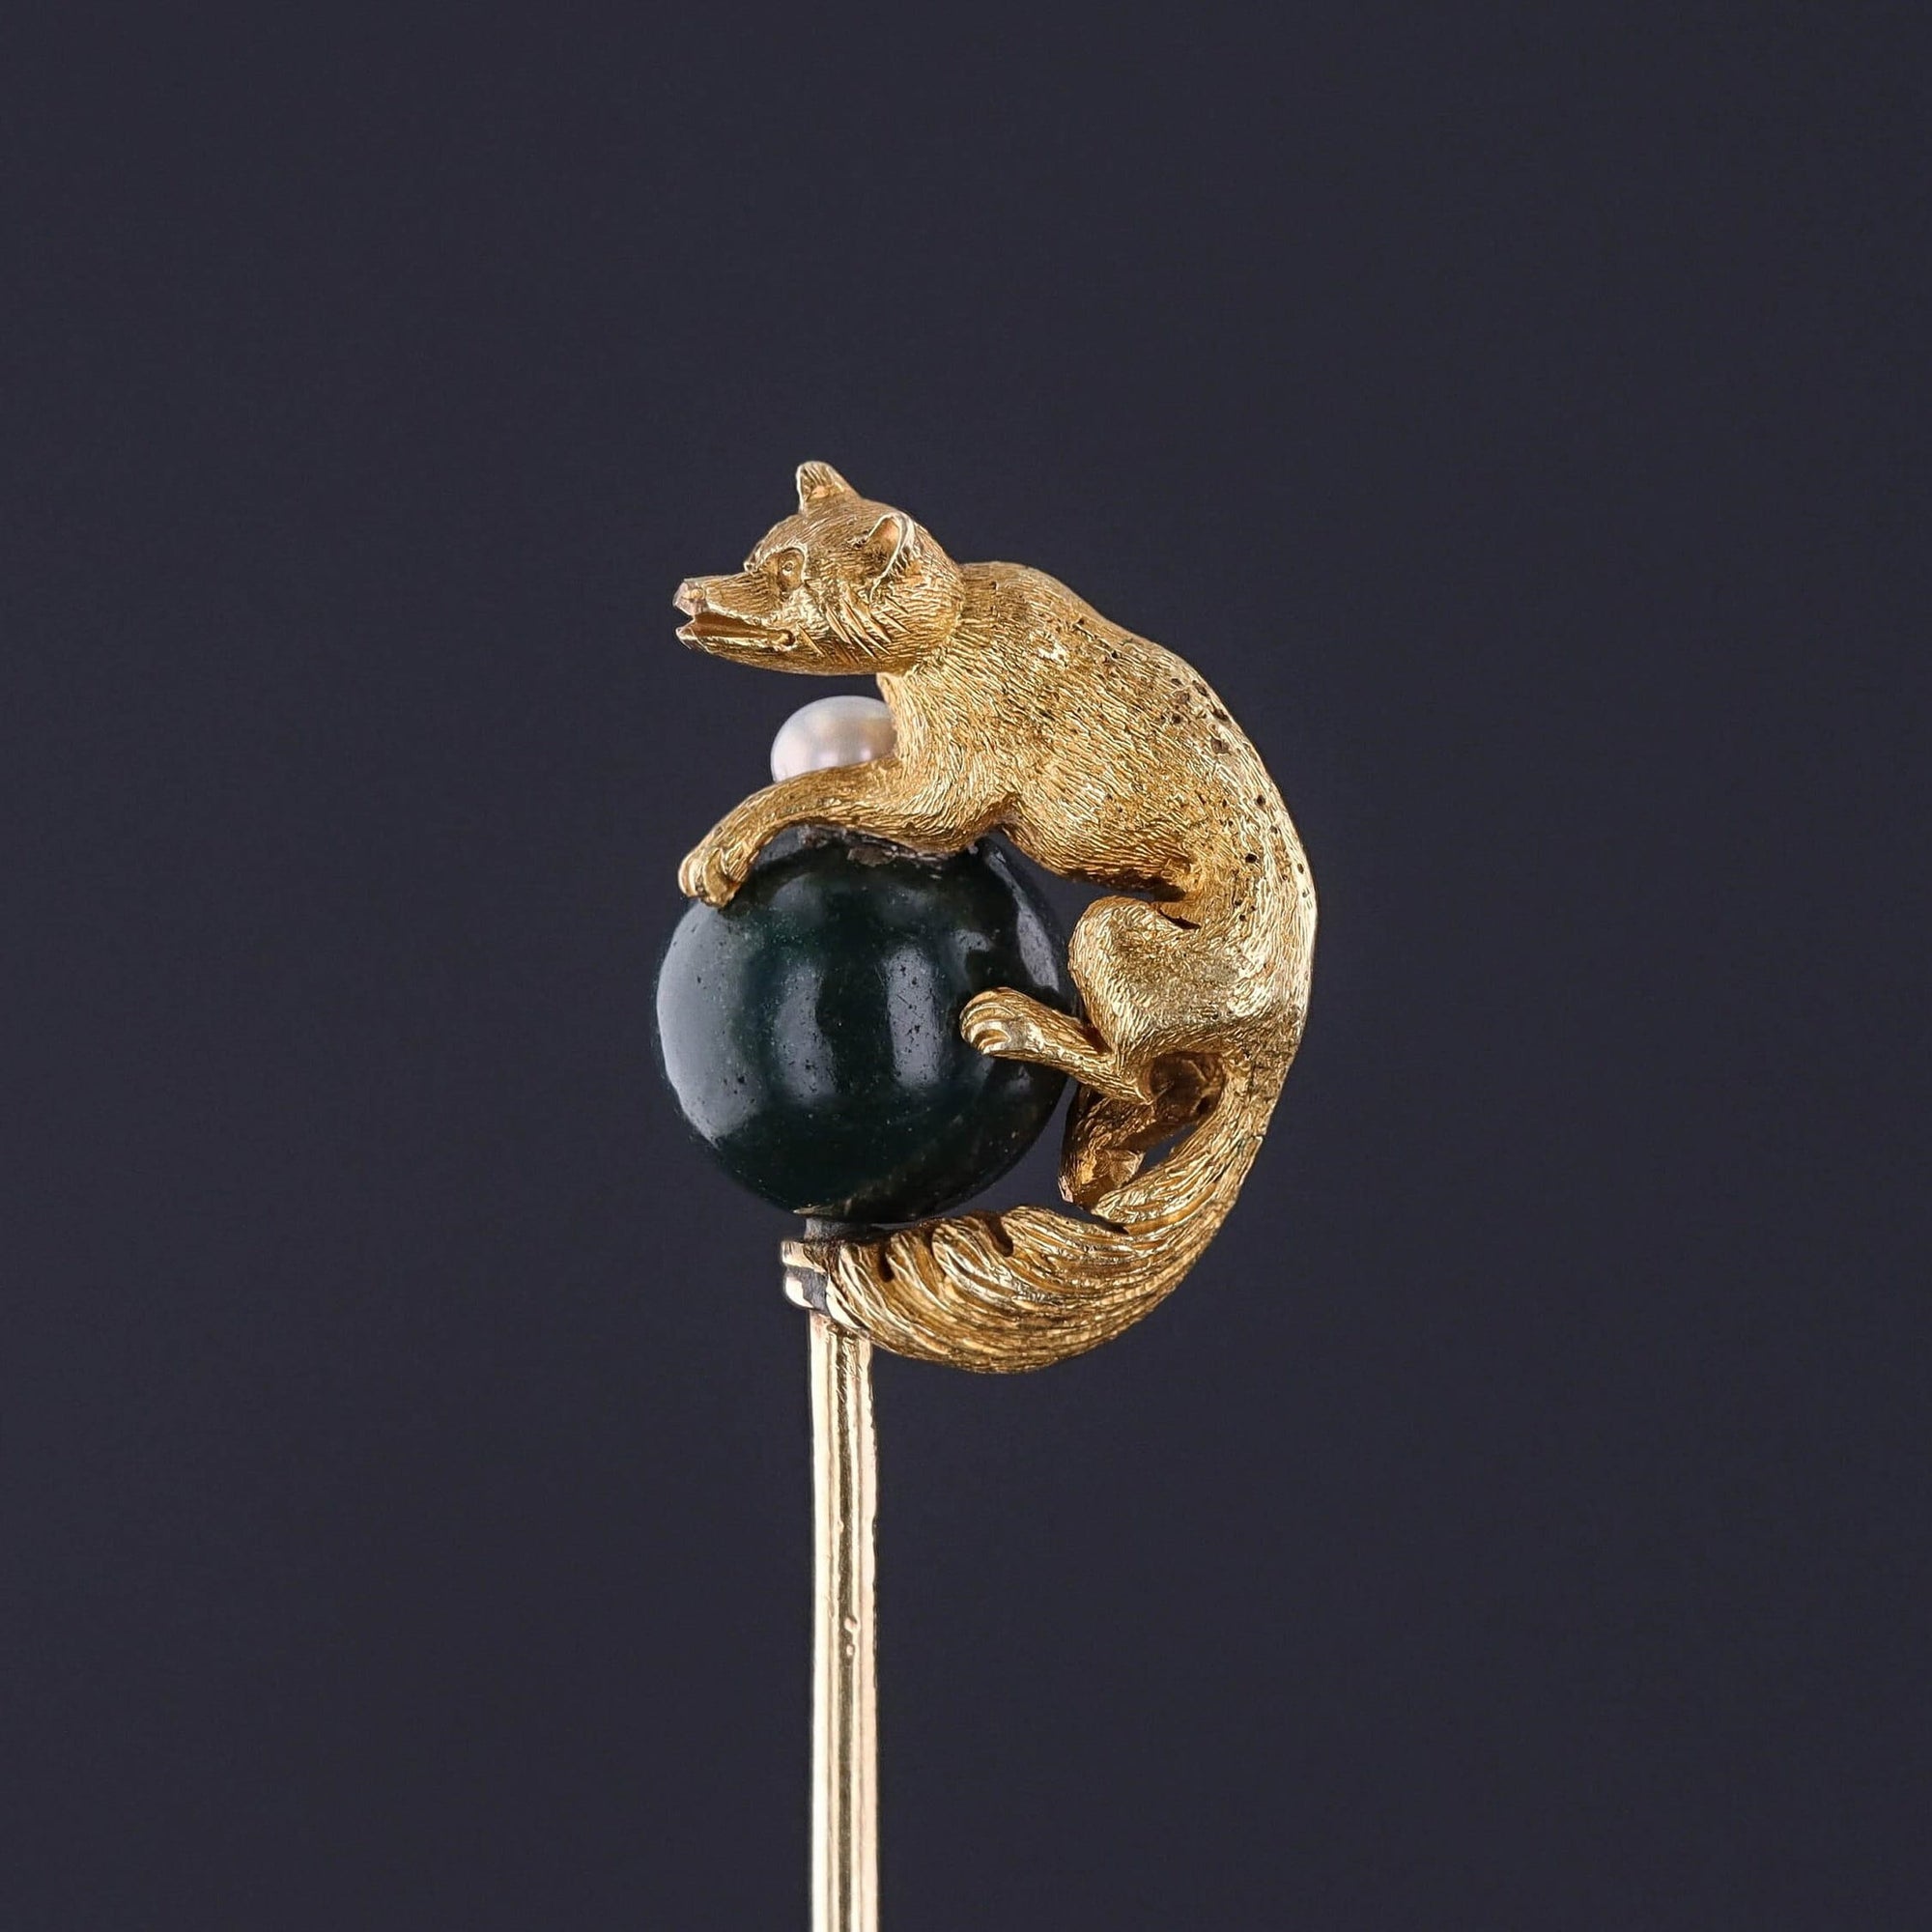 Victorian Bloodstone Fox Stickpin: Transport yourself to the elegance of the late 19th century with this remarkable antique stickpin from 1870-1880.